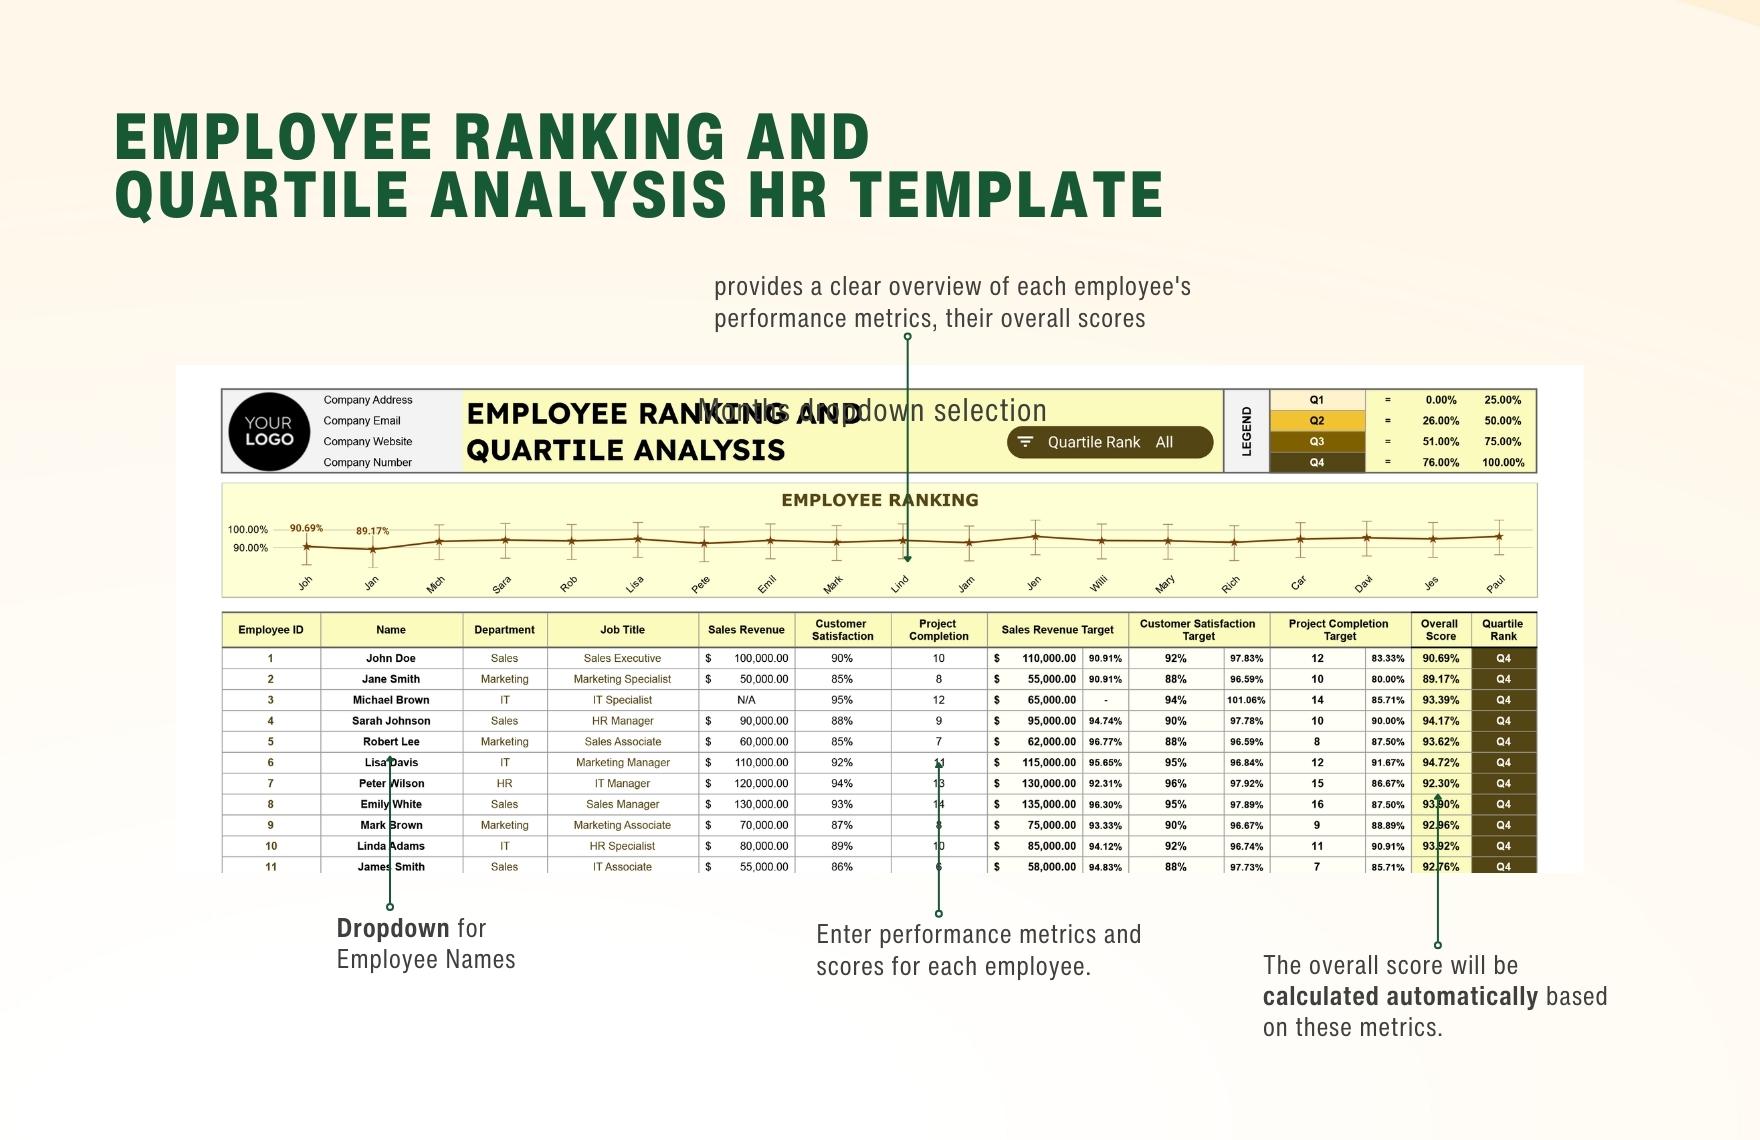 Employee Ranking and Quartile Analysis HR Template